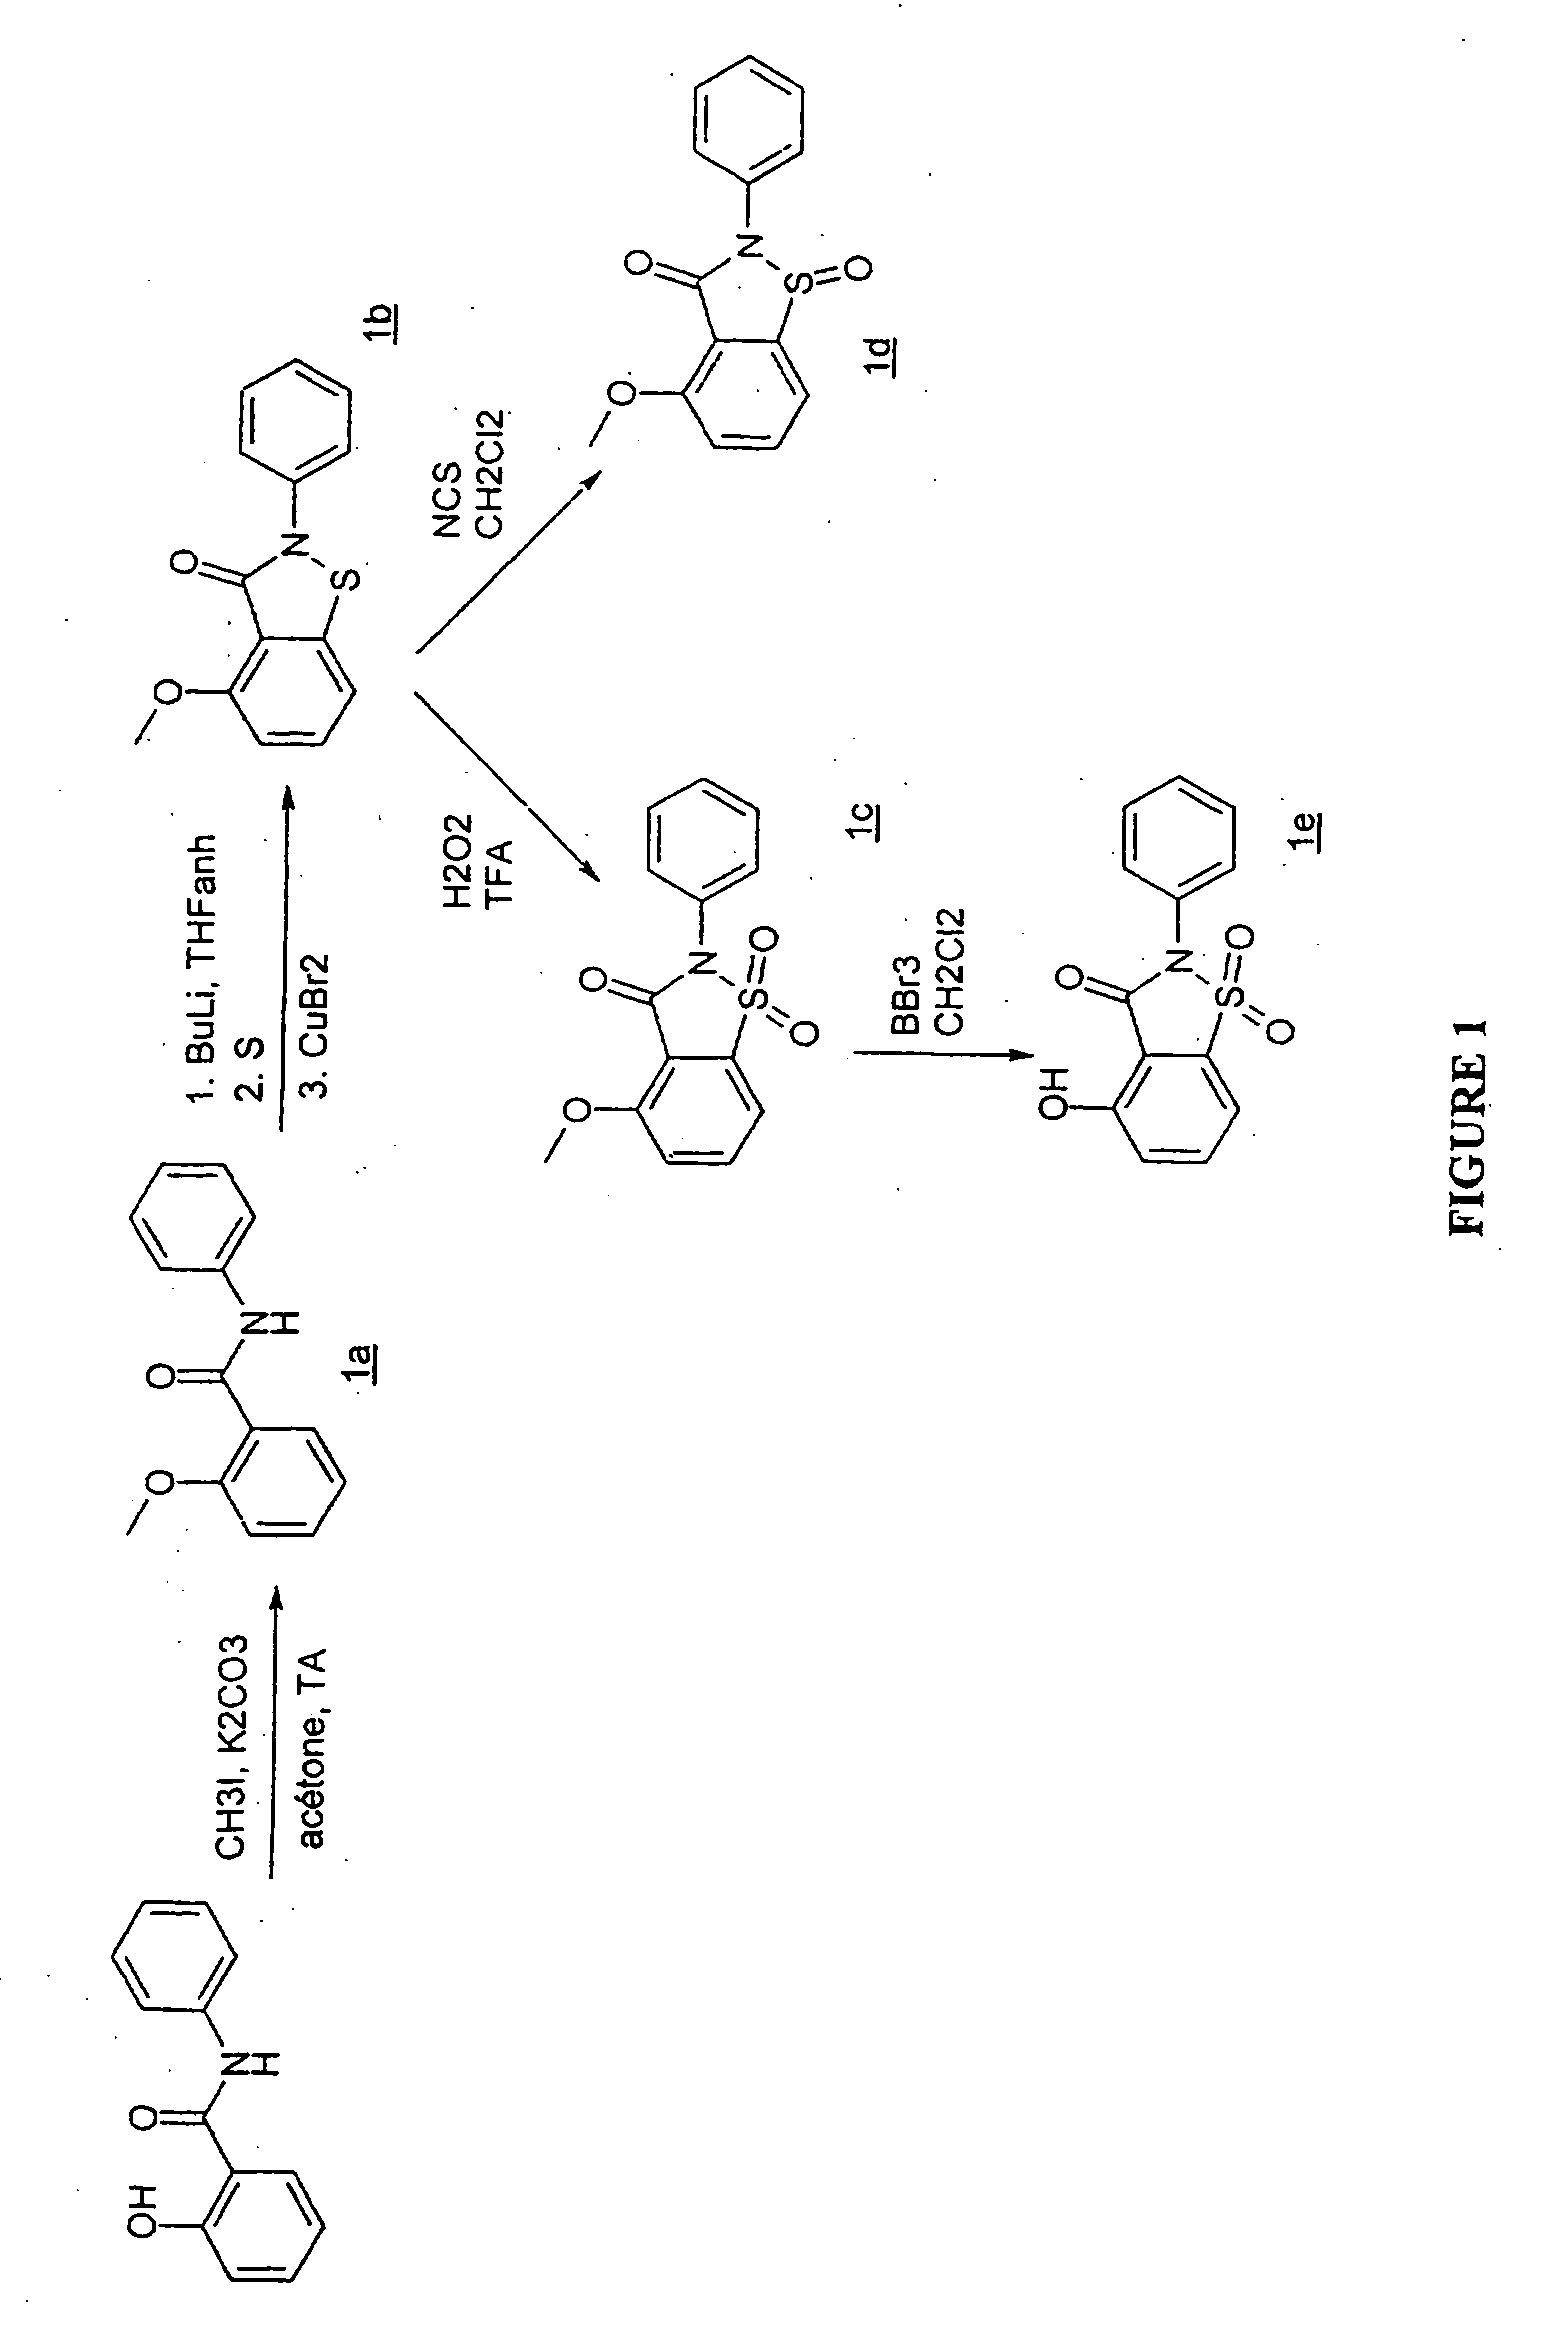 Benzoisothiazolone compositions